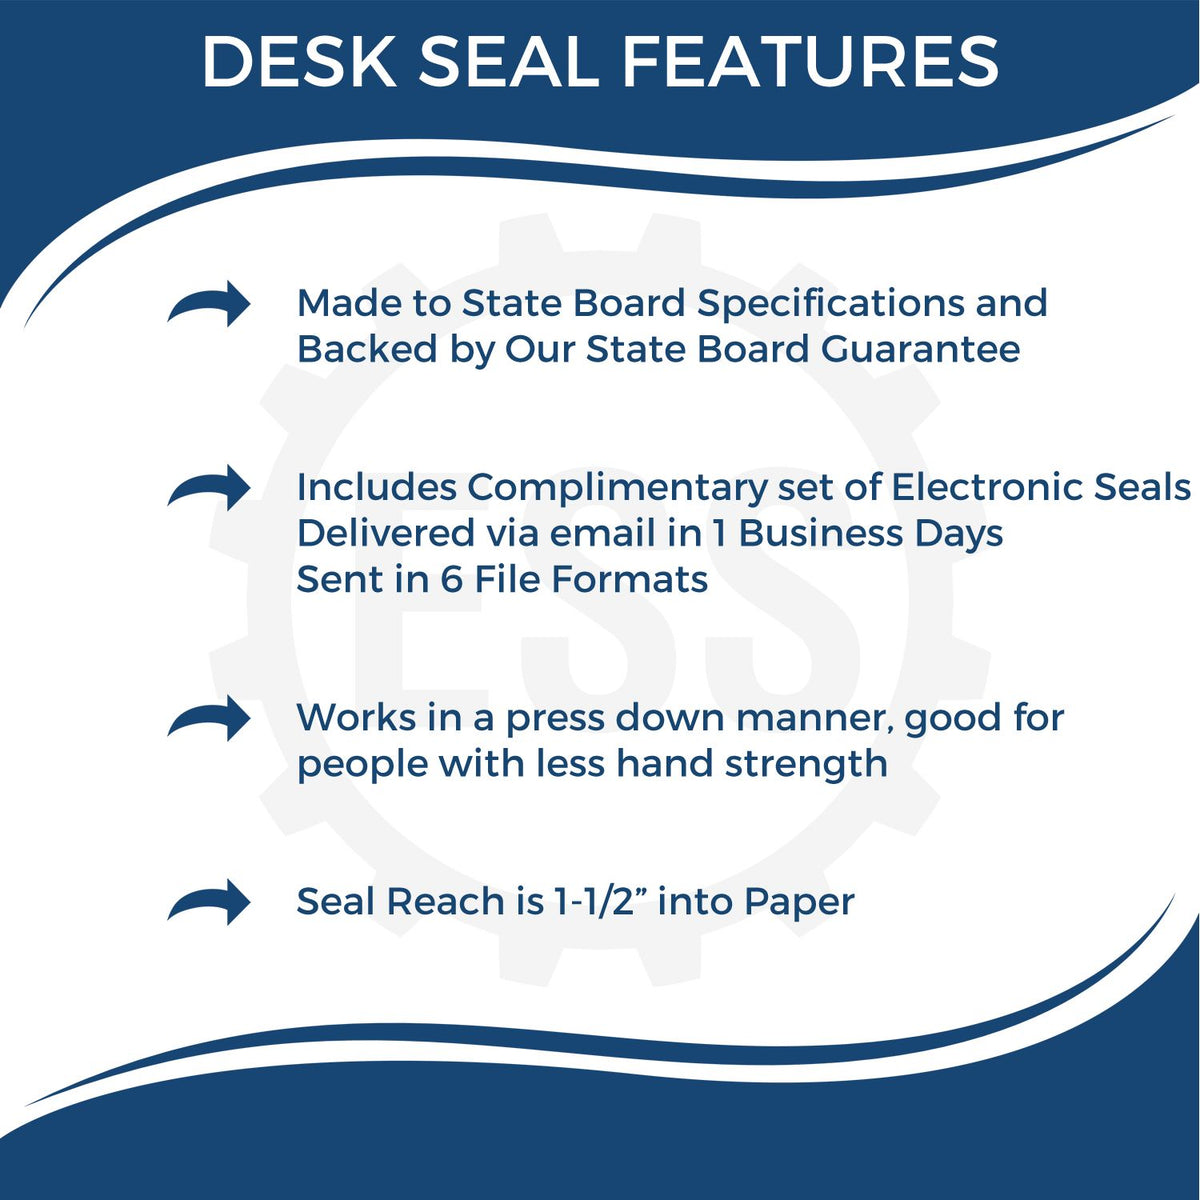 A picture of an infographic highlighting the selling points for the Arizona Geologist Desk Seal